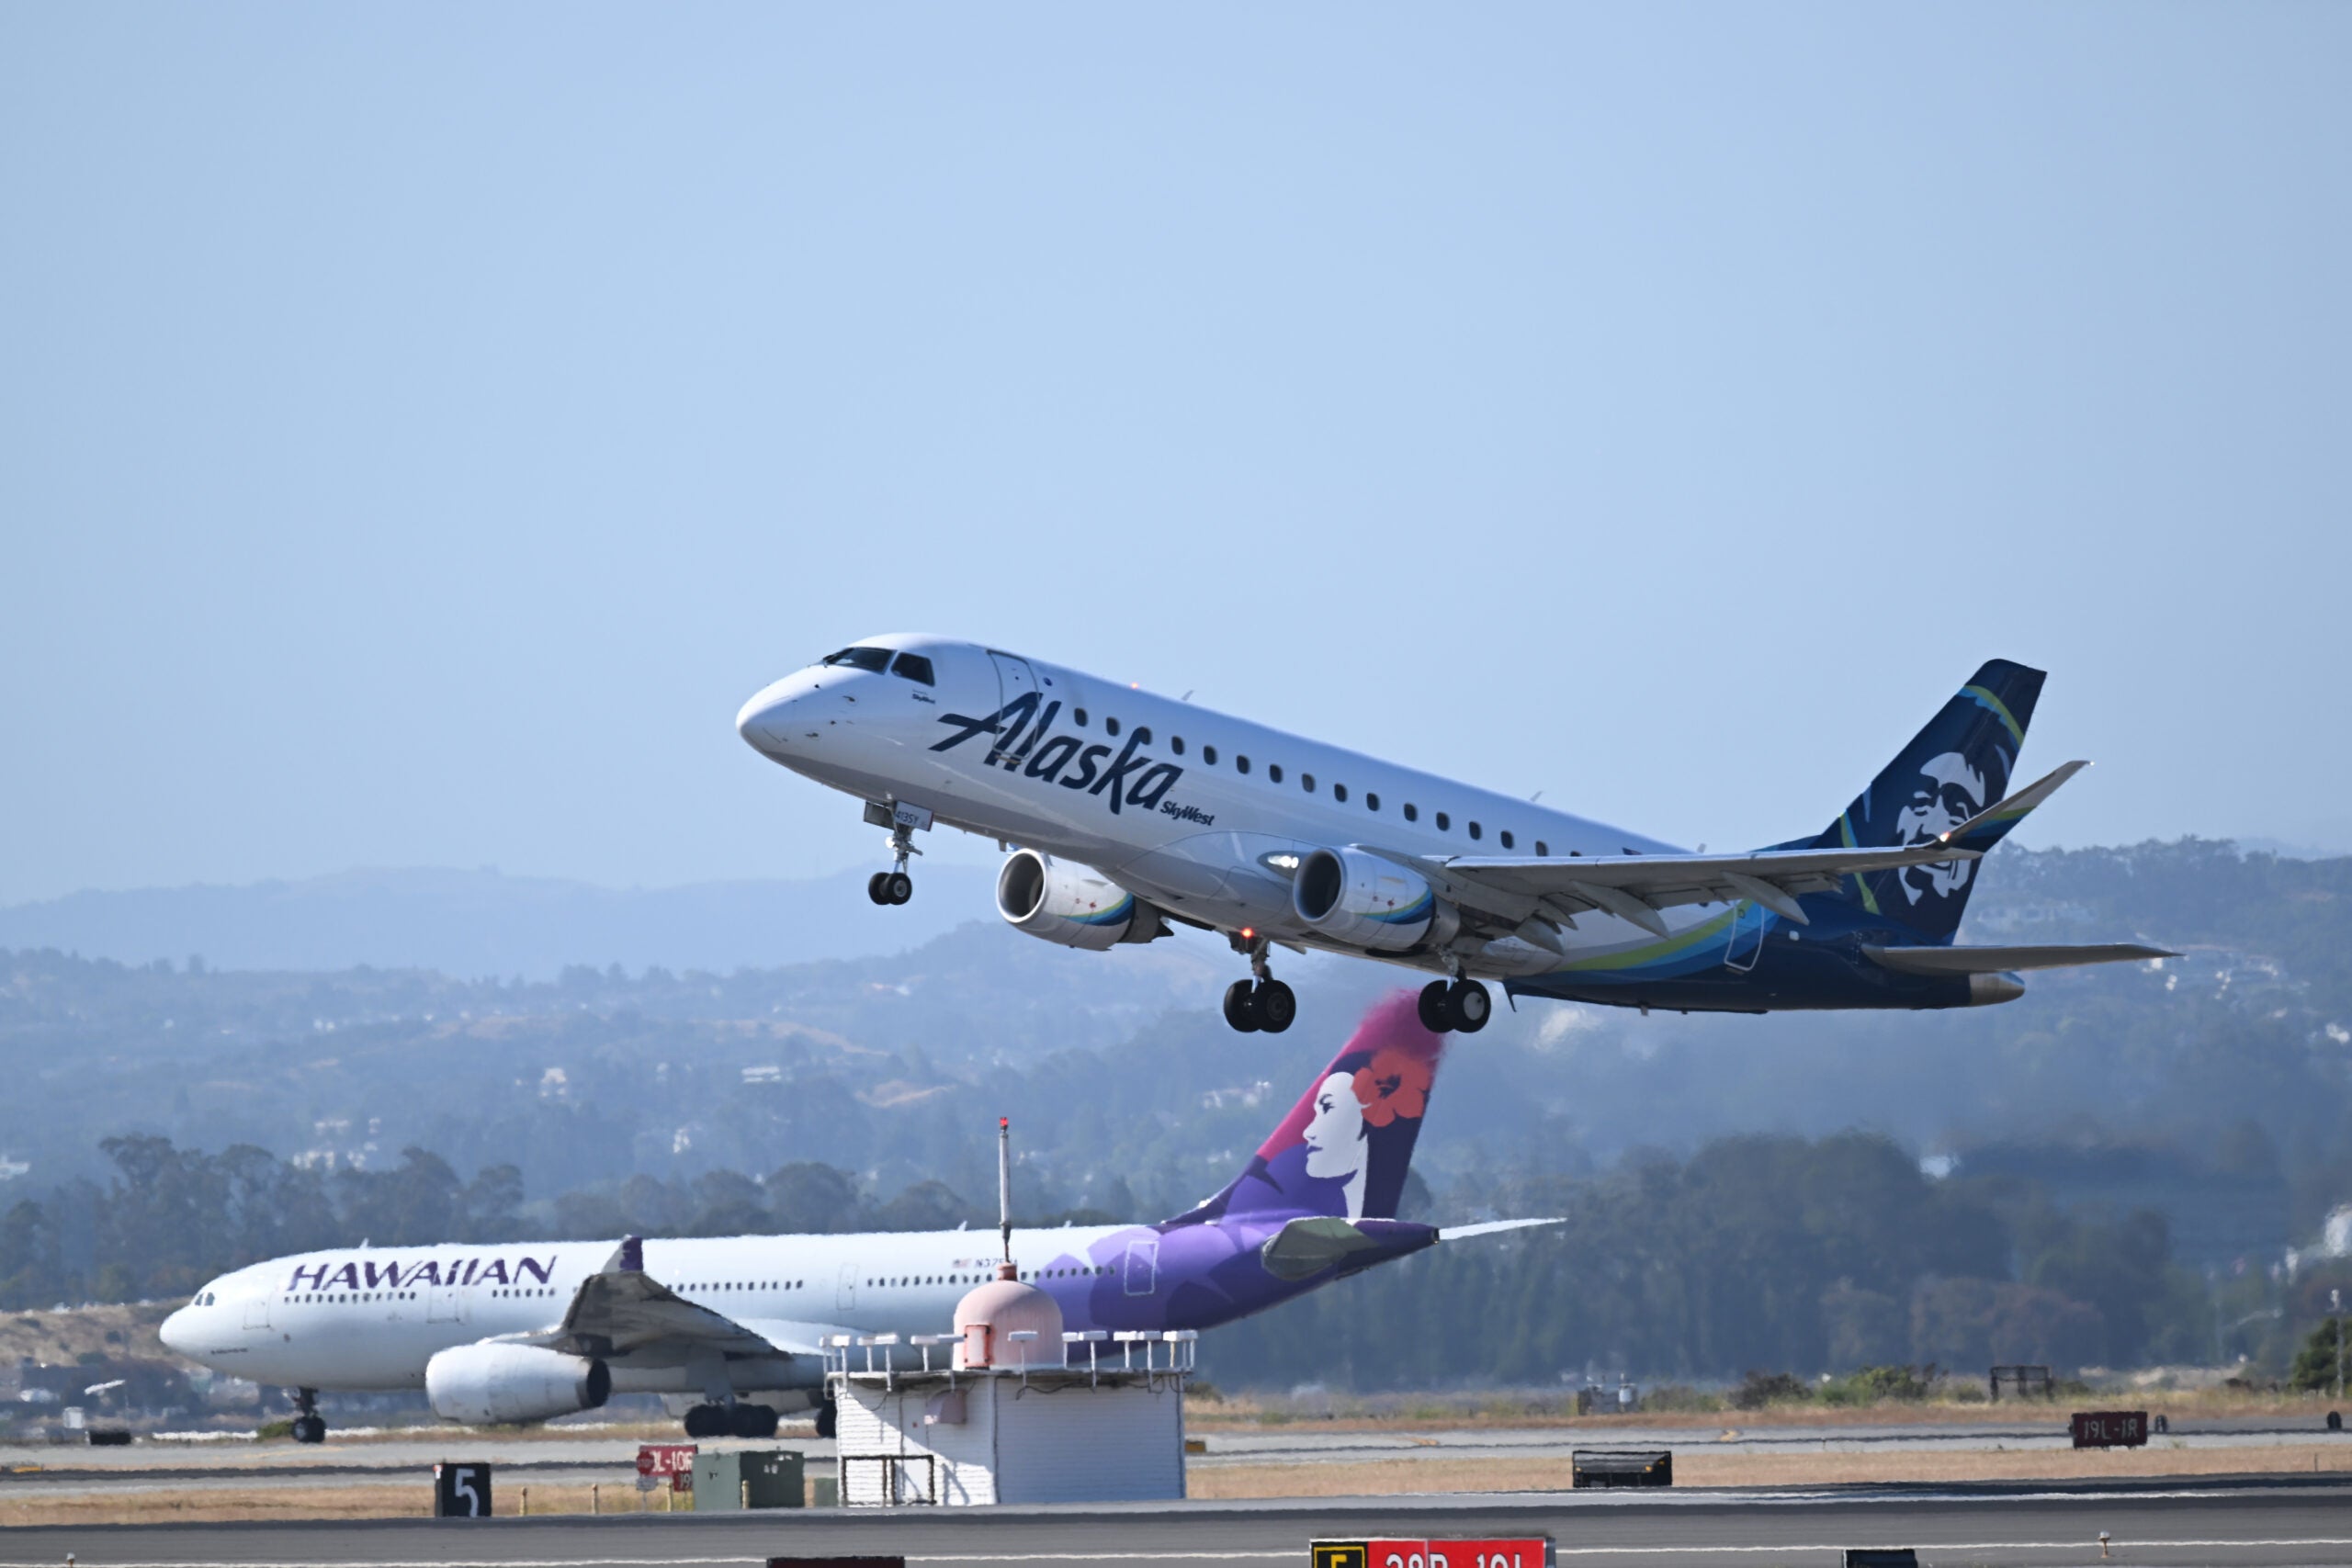 Why the Alaska-Hawaiian merger could be a win-win for frequent flyers